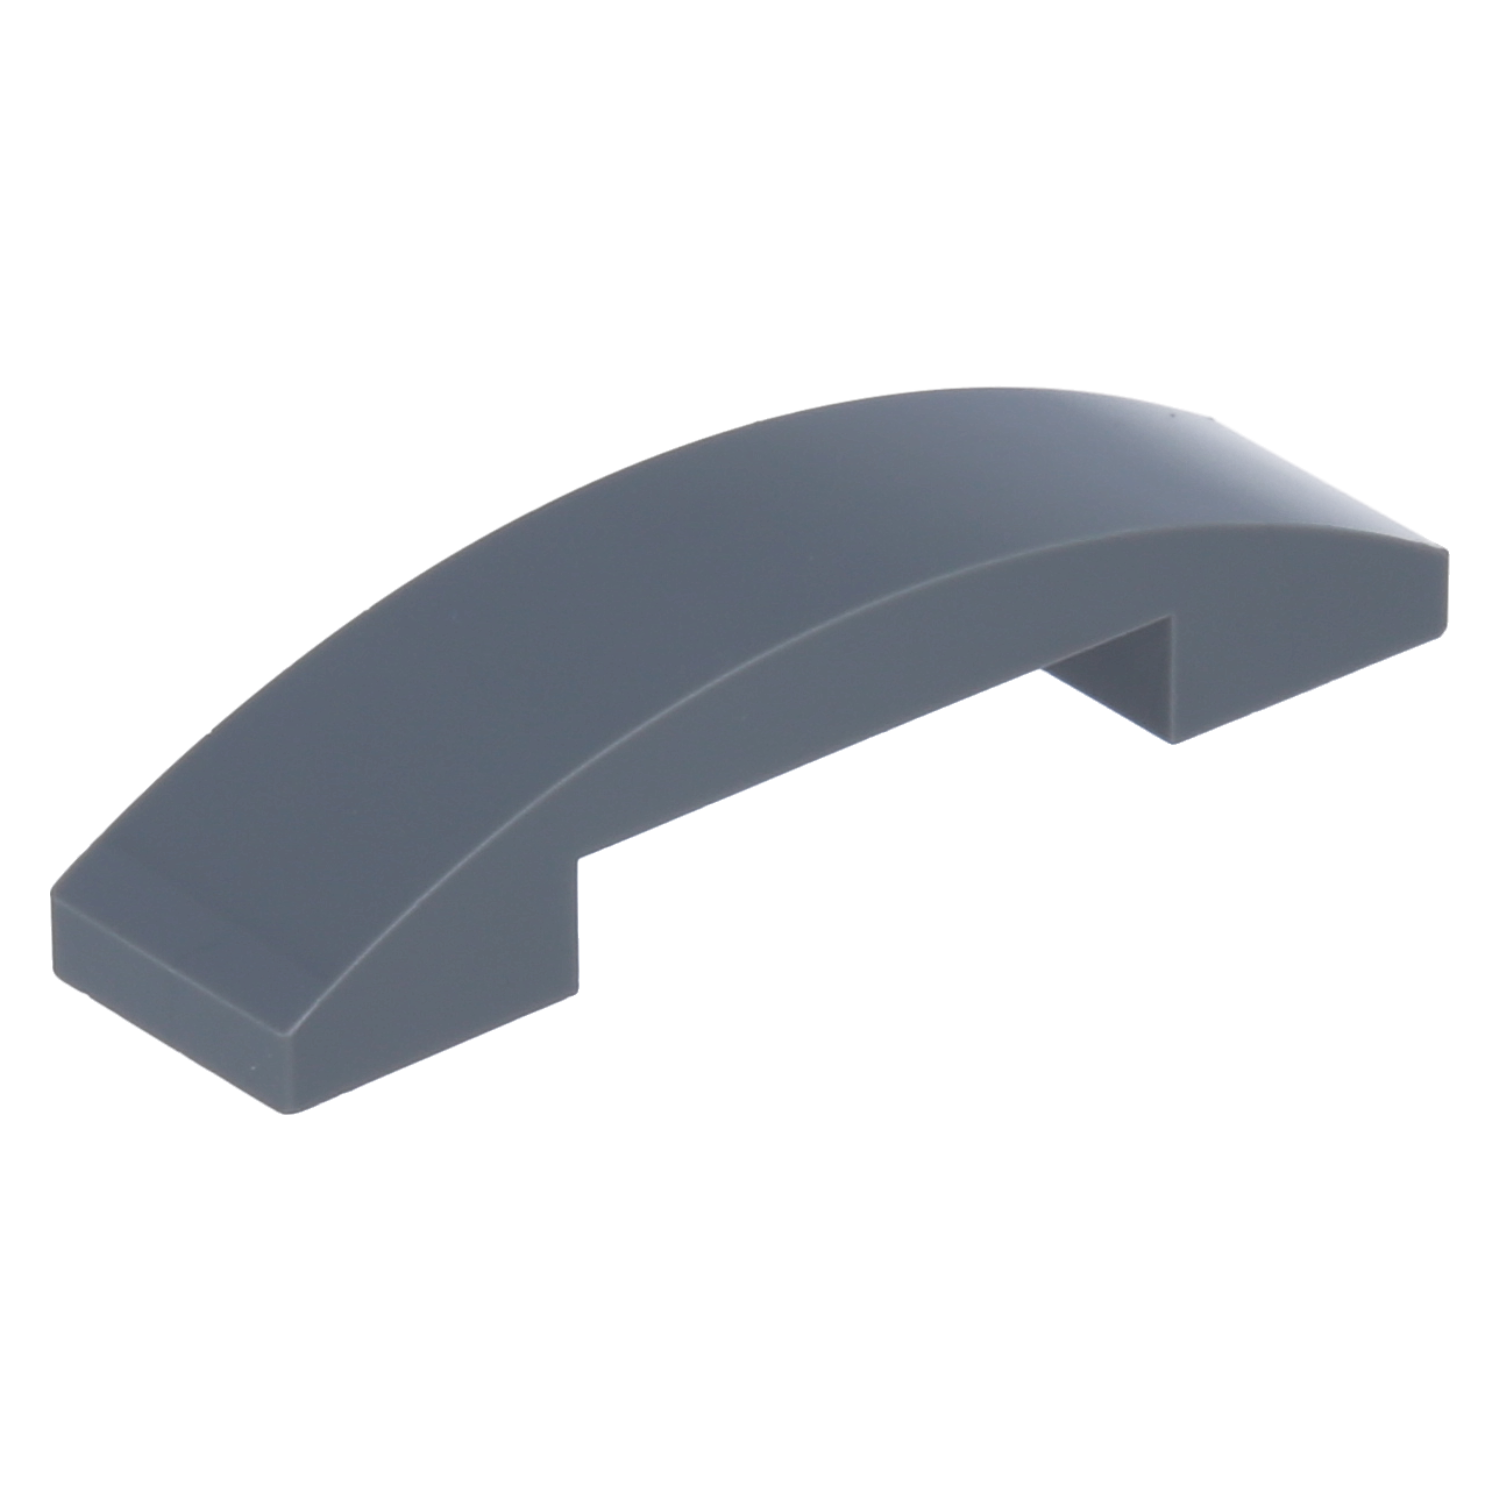 LEGO roof stones (modified) - slanted curved 4 x 1 x 2/3 double